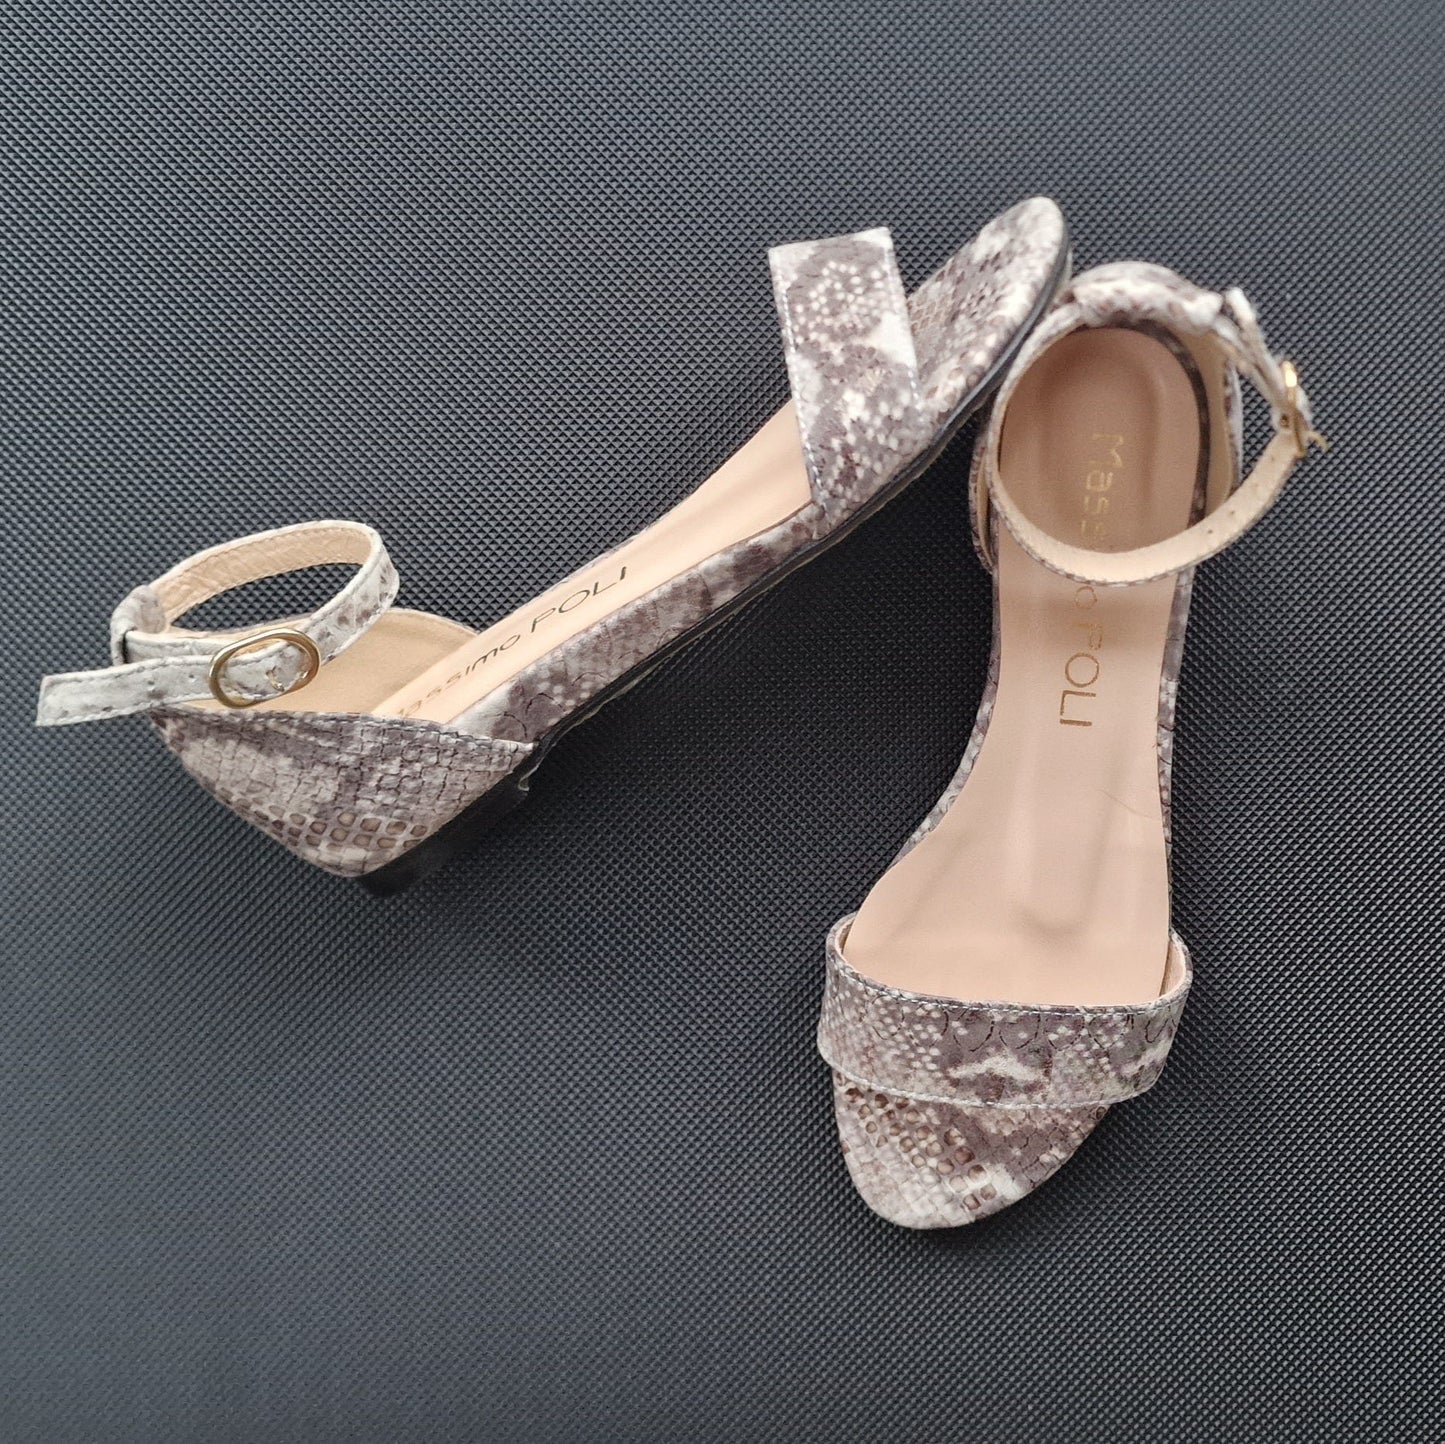 Small size ladies flat sandals in grey snake leather